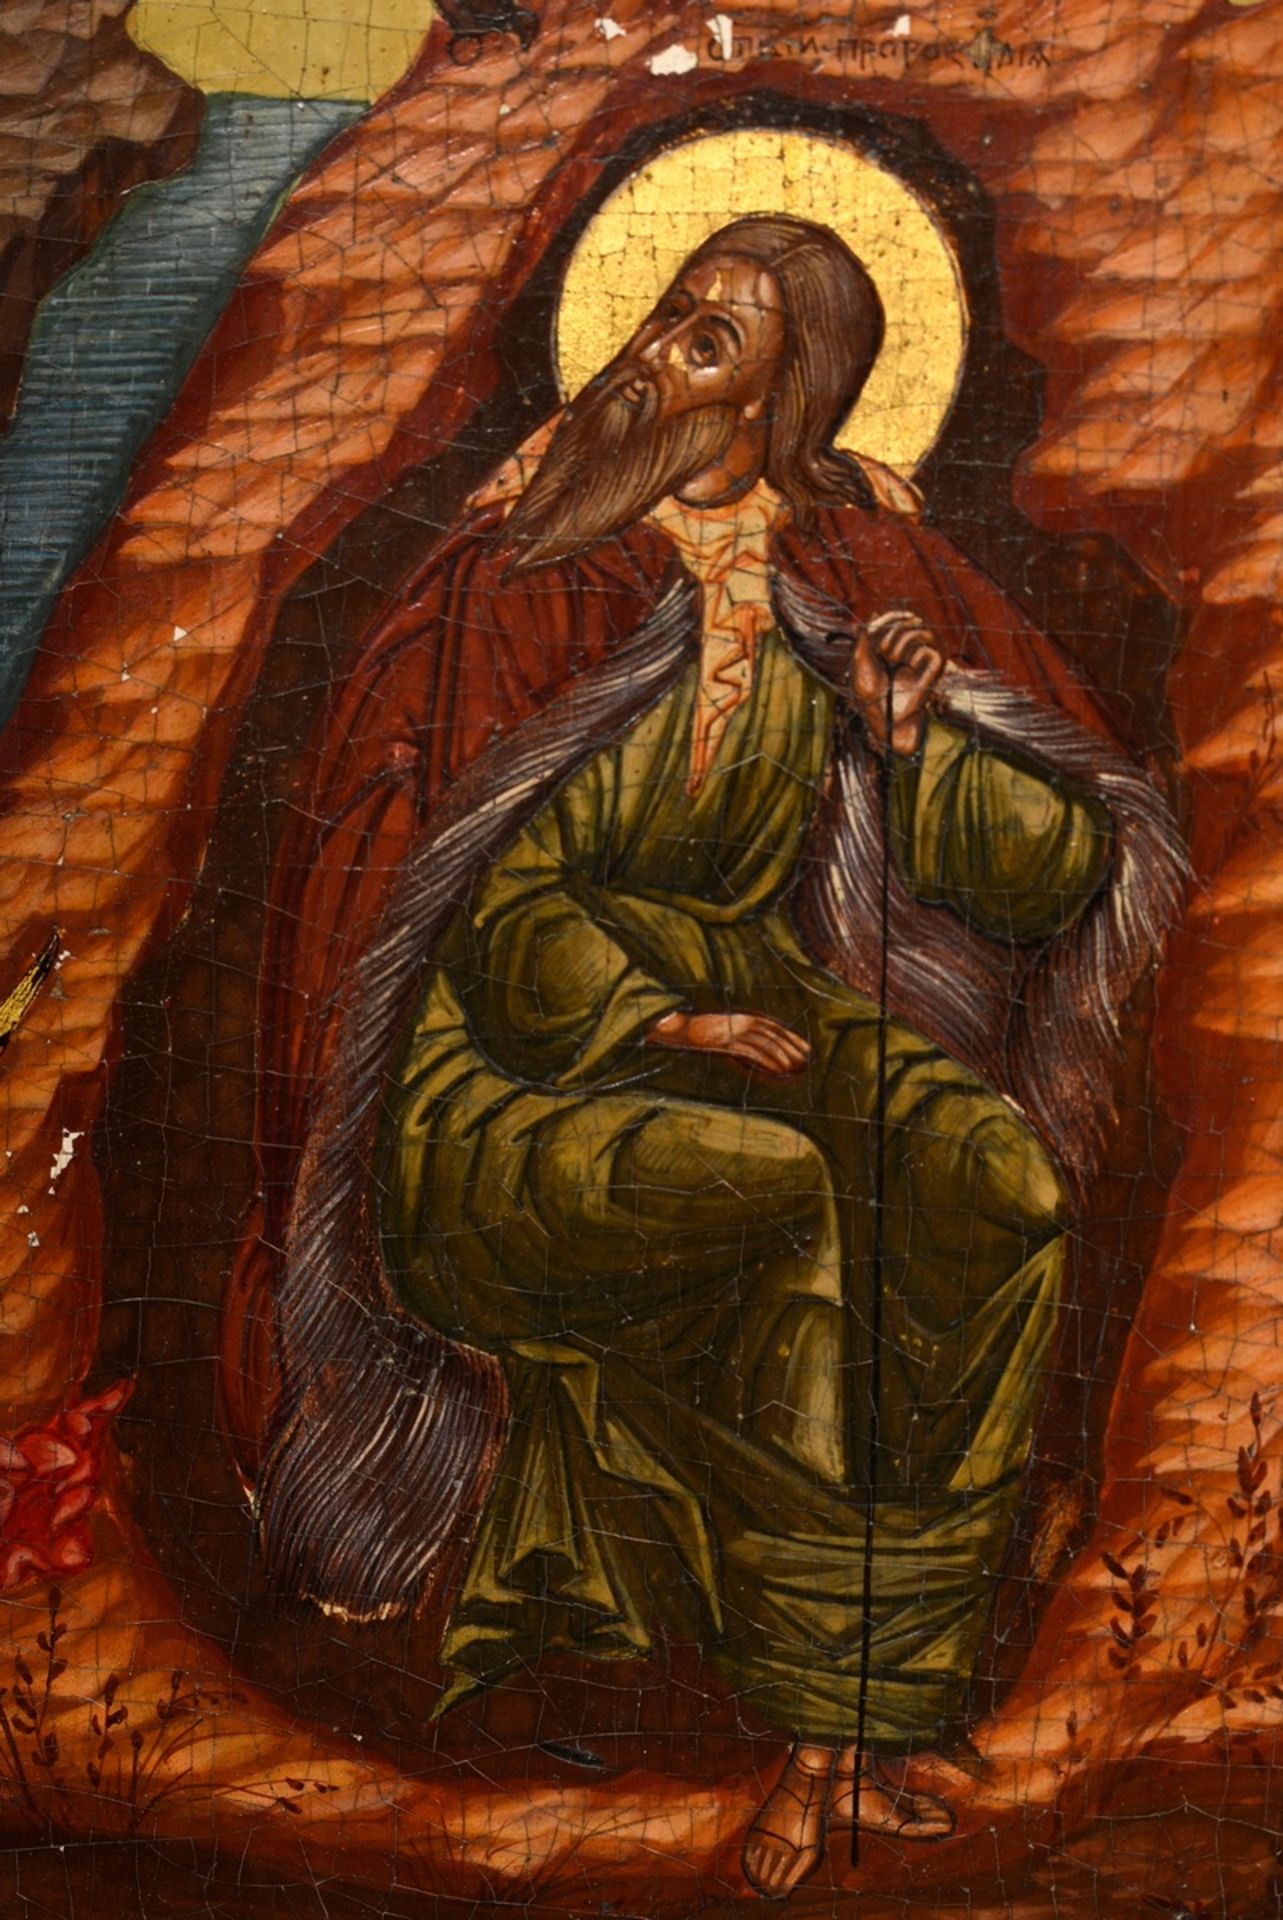 Russian icon "The Prophet Elijah" with surrounding scenes from his life in the desert and his fiery - Image 5 of 8